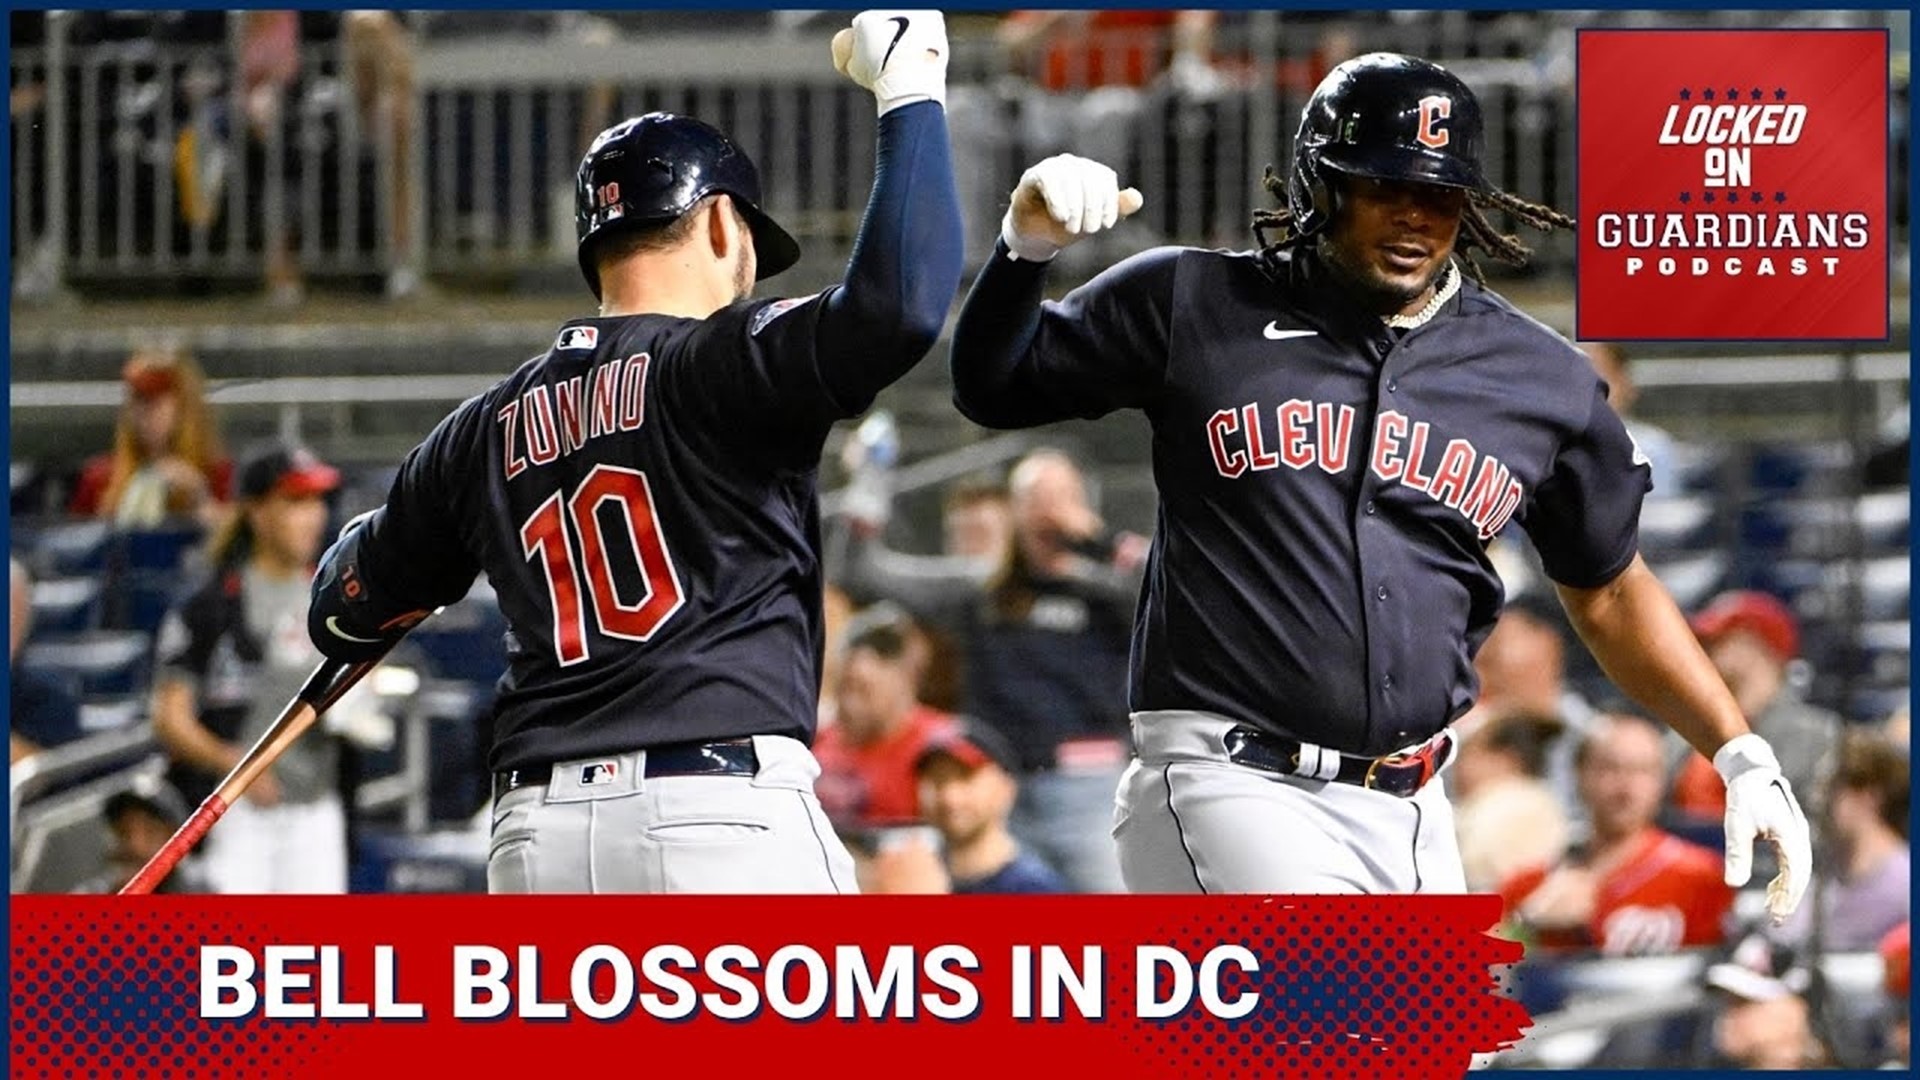 Josh Bell Blossoms in DC as Guardians Take Series with Nationals